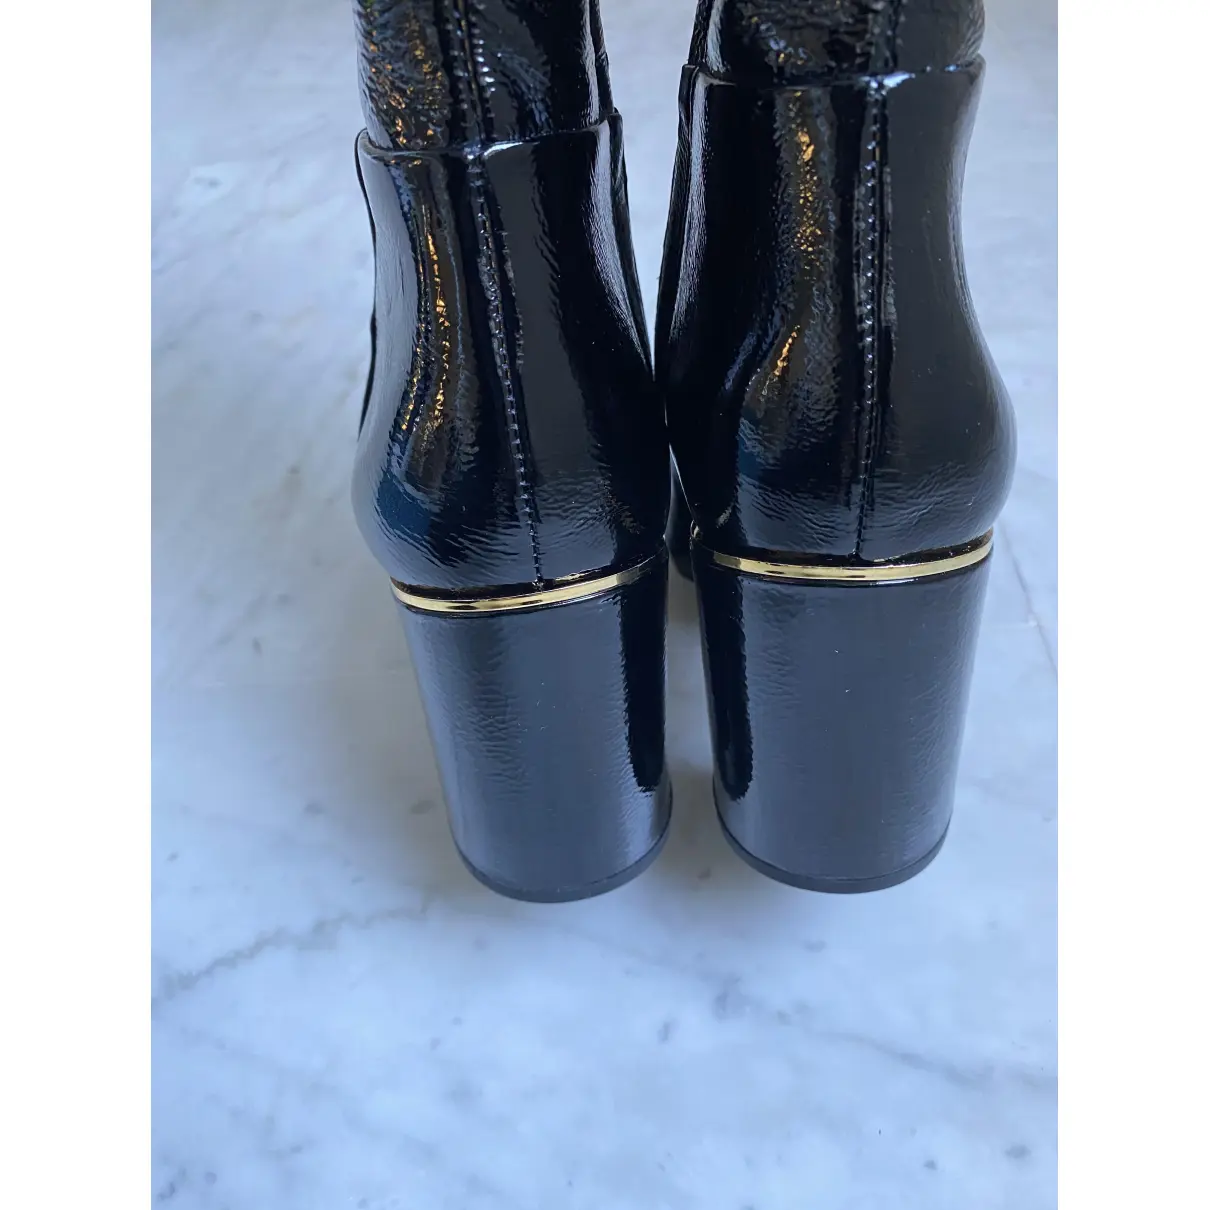 Patent leather boots Tory Burch